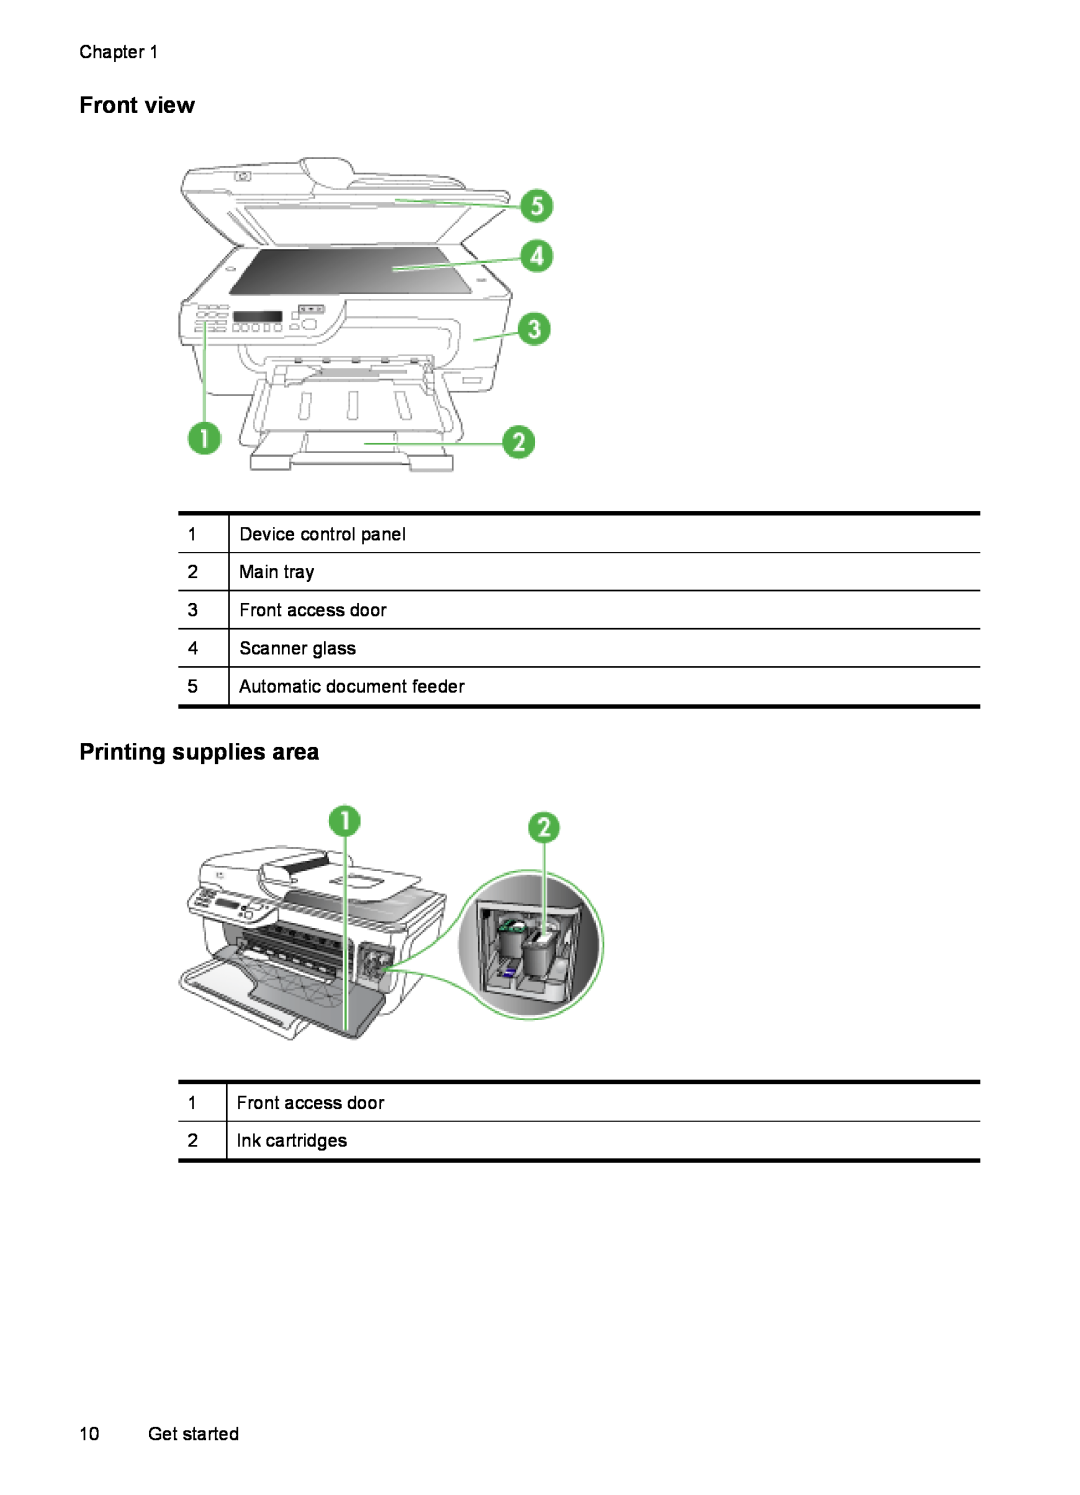 HP J4550 Front view, Printing supplies area, Chapter, Device control panel 2 Main tray 3 Front access door, Get started 